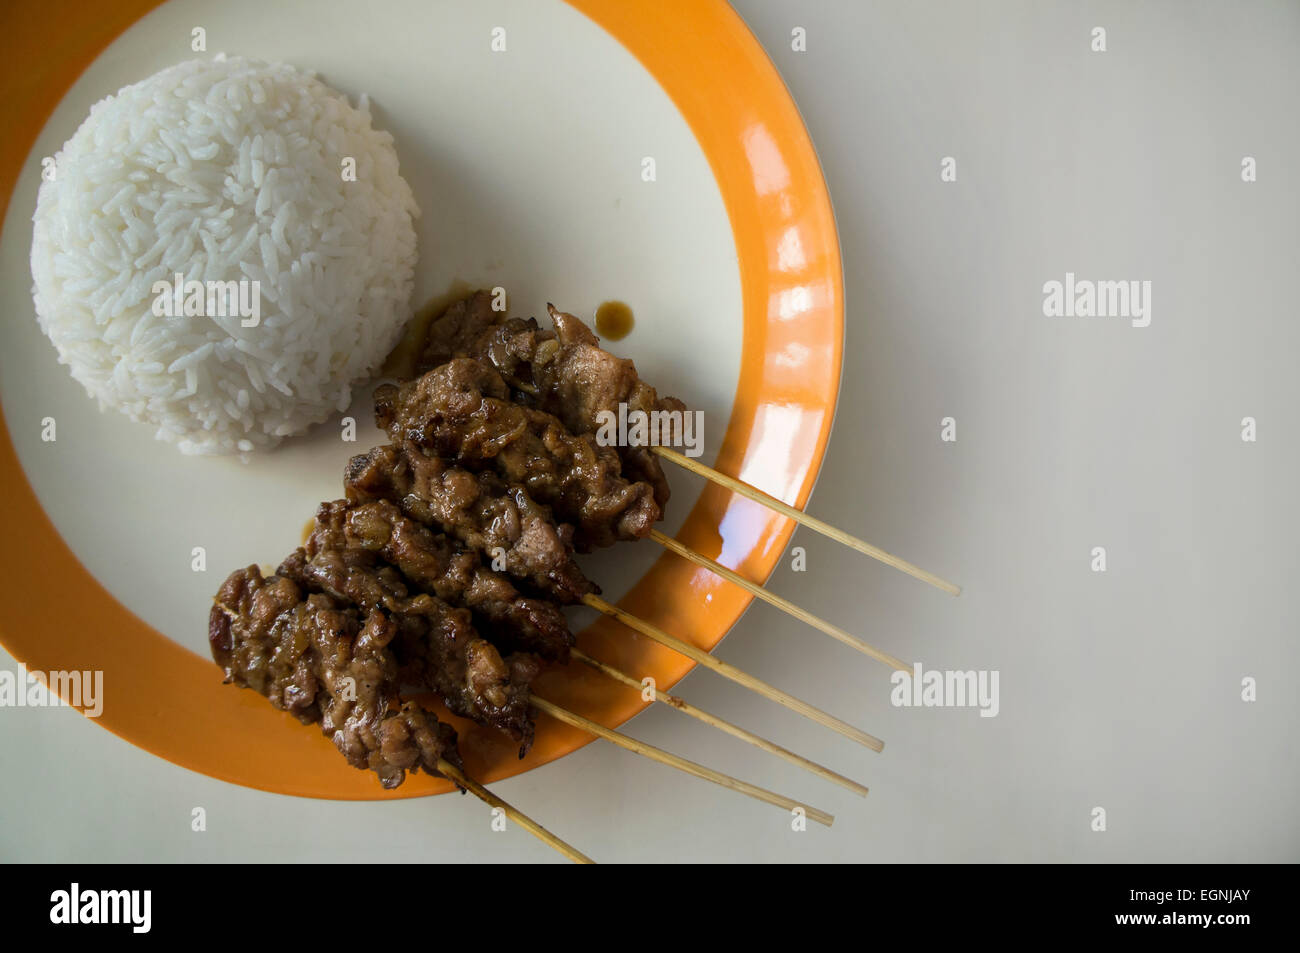 Grilled barbecued pork with white Jasmine rice Stock Photo